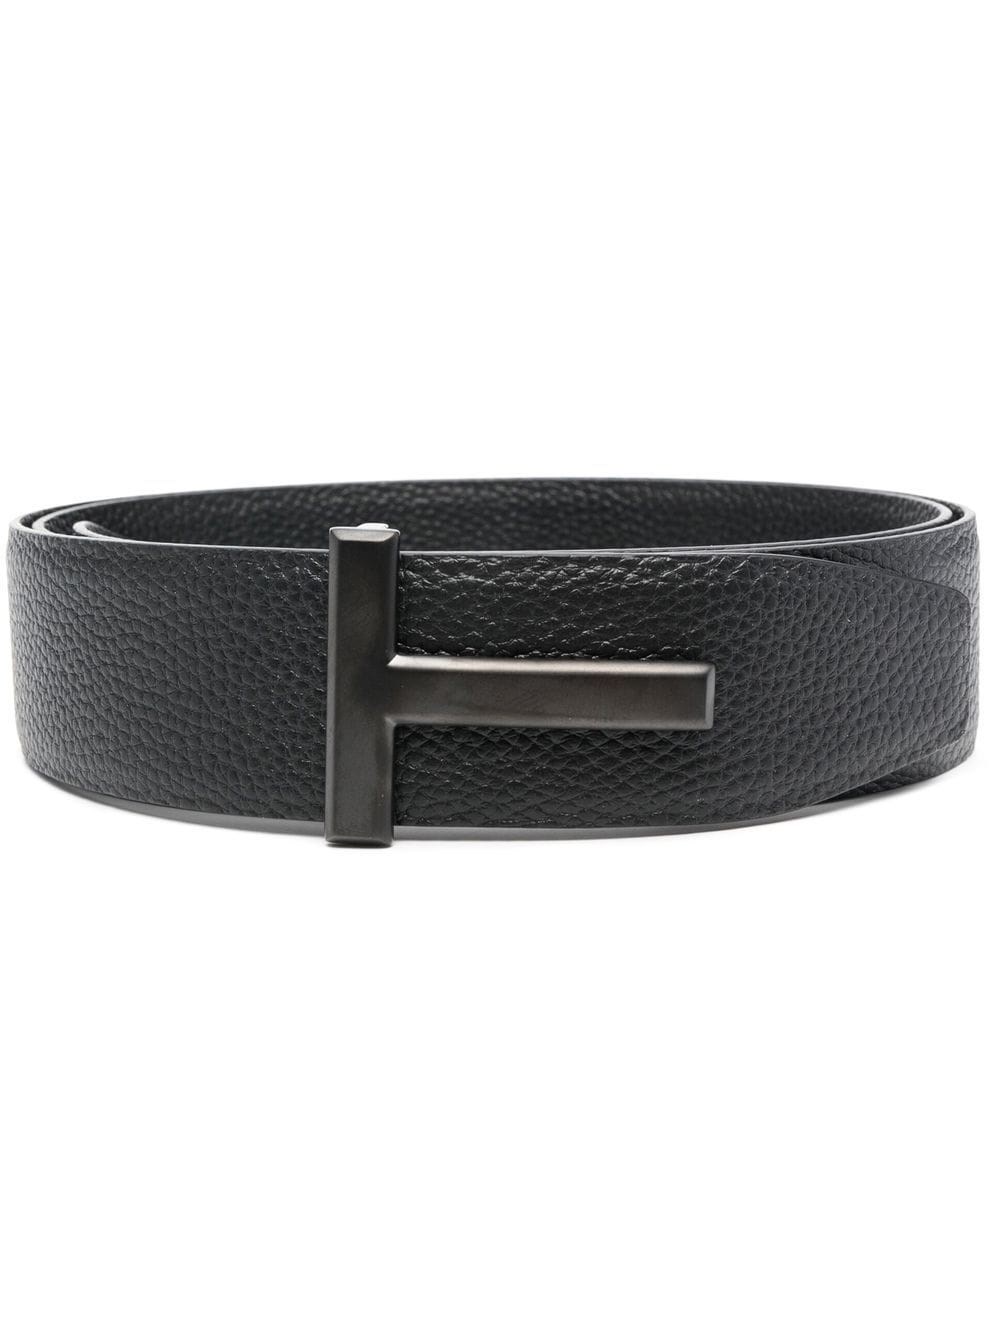 TOM FORD BELT WITH REVERSIBLE BUCKLE